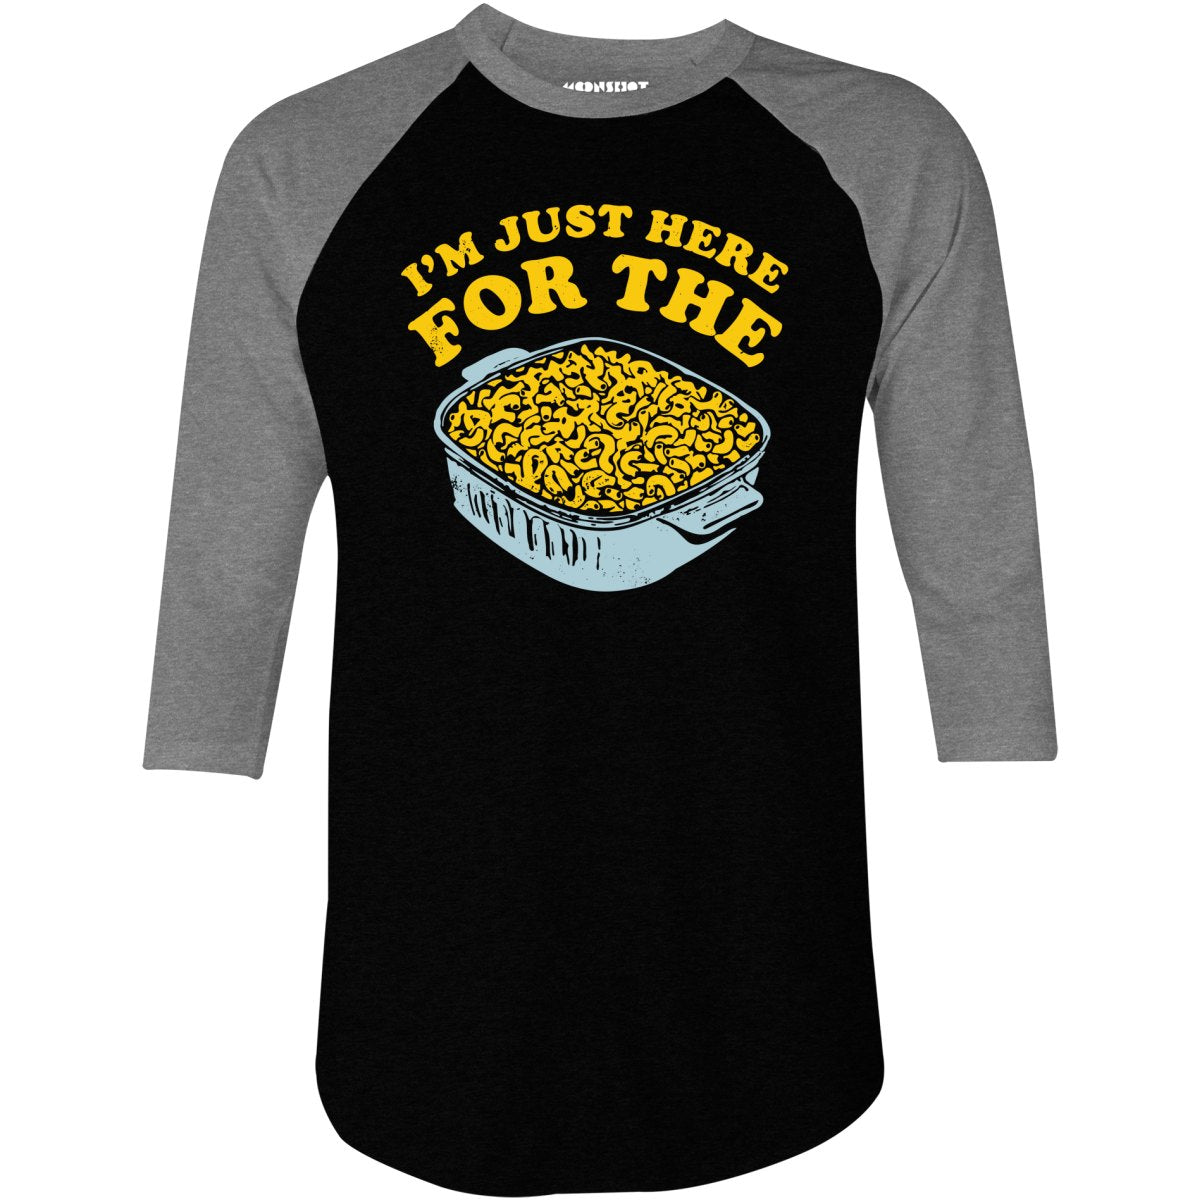 I'm Just Here for the Mac and Cheese - 3/4 Sleeve Raglan T-Shirt